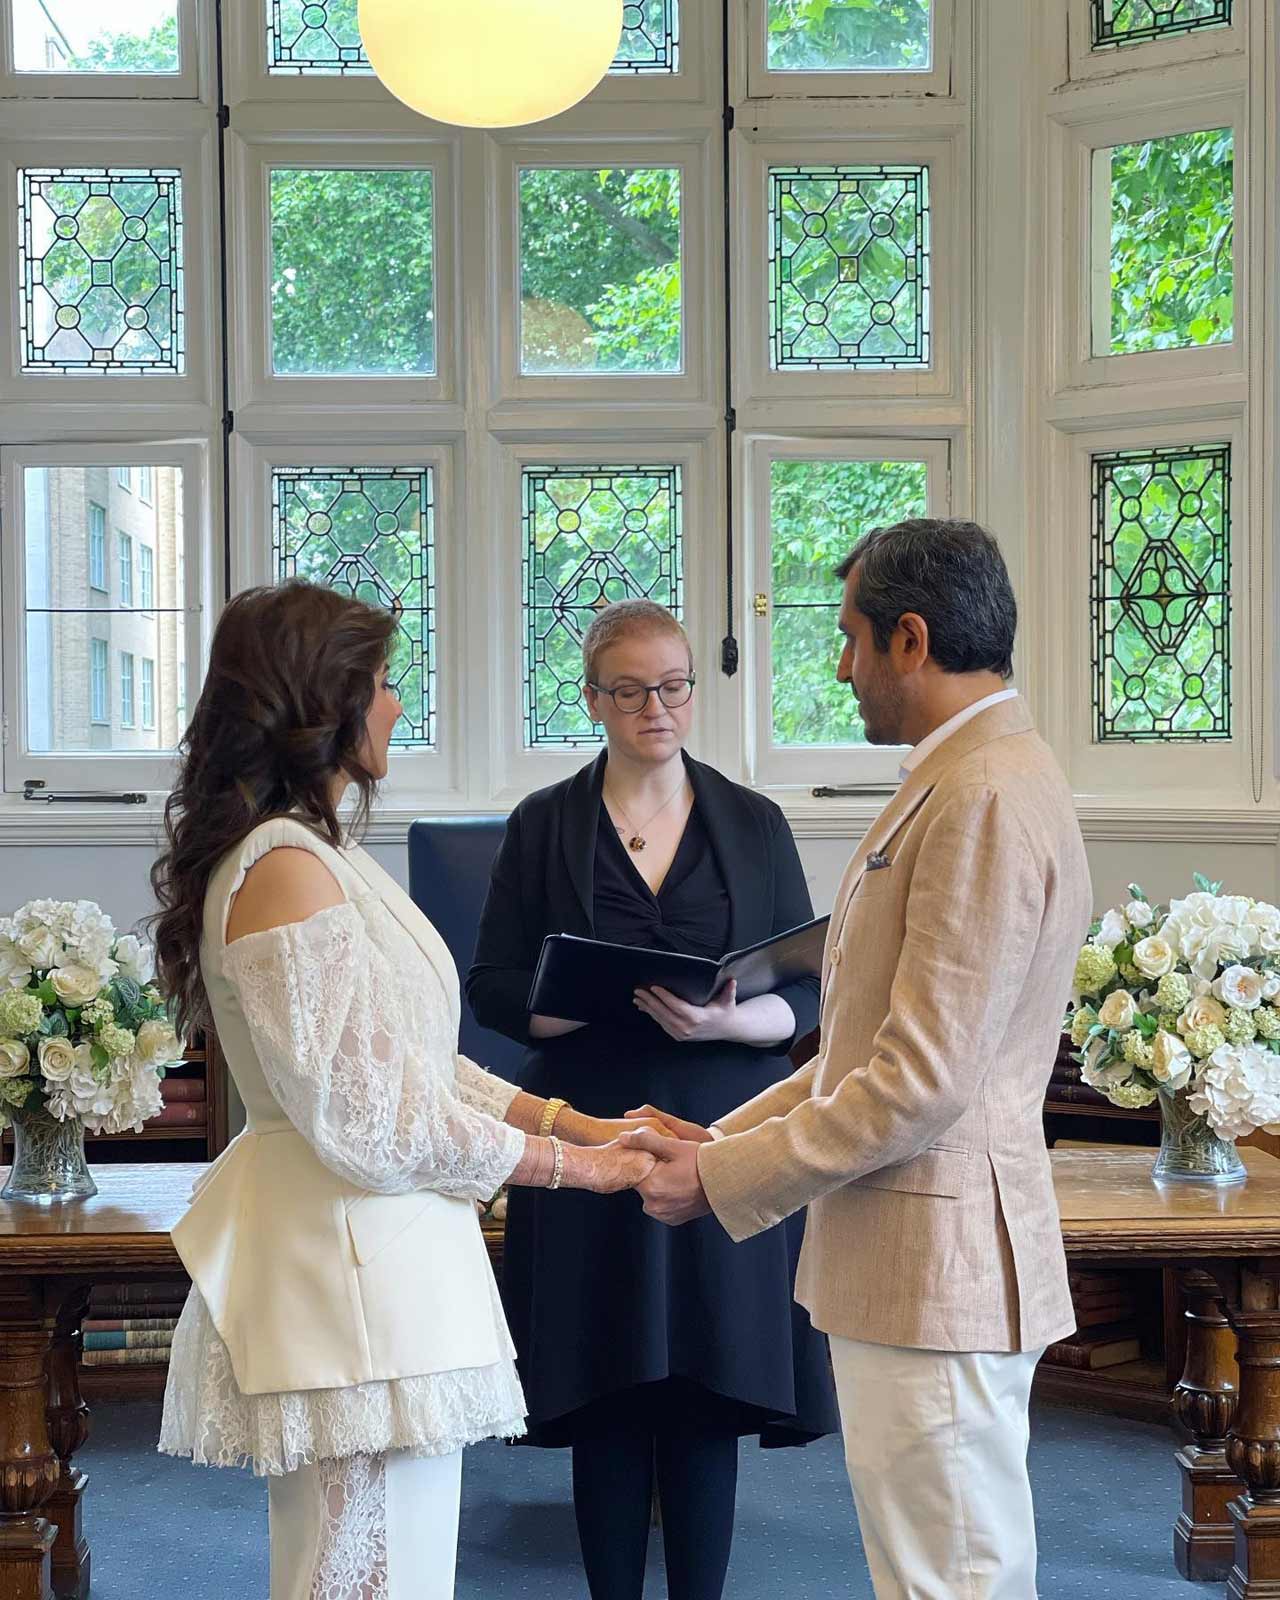 Indian singer Kanika Kapoor, who recently married her longtime father-in-law Gautam Hathiramani, in London again took her wedding vows with him in a church wedding and posted beautiful photos of her on Sunday. the ceremony on his social media account.